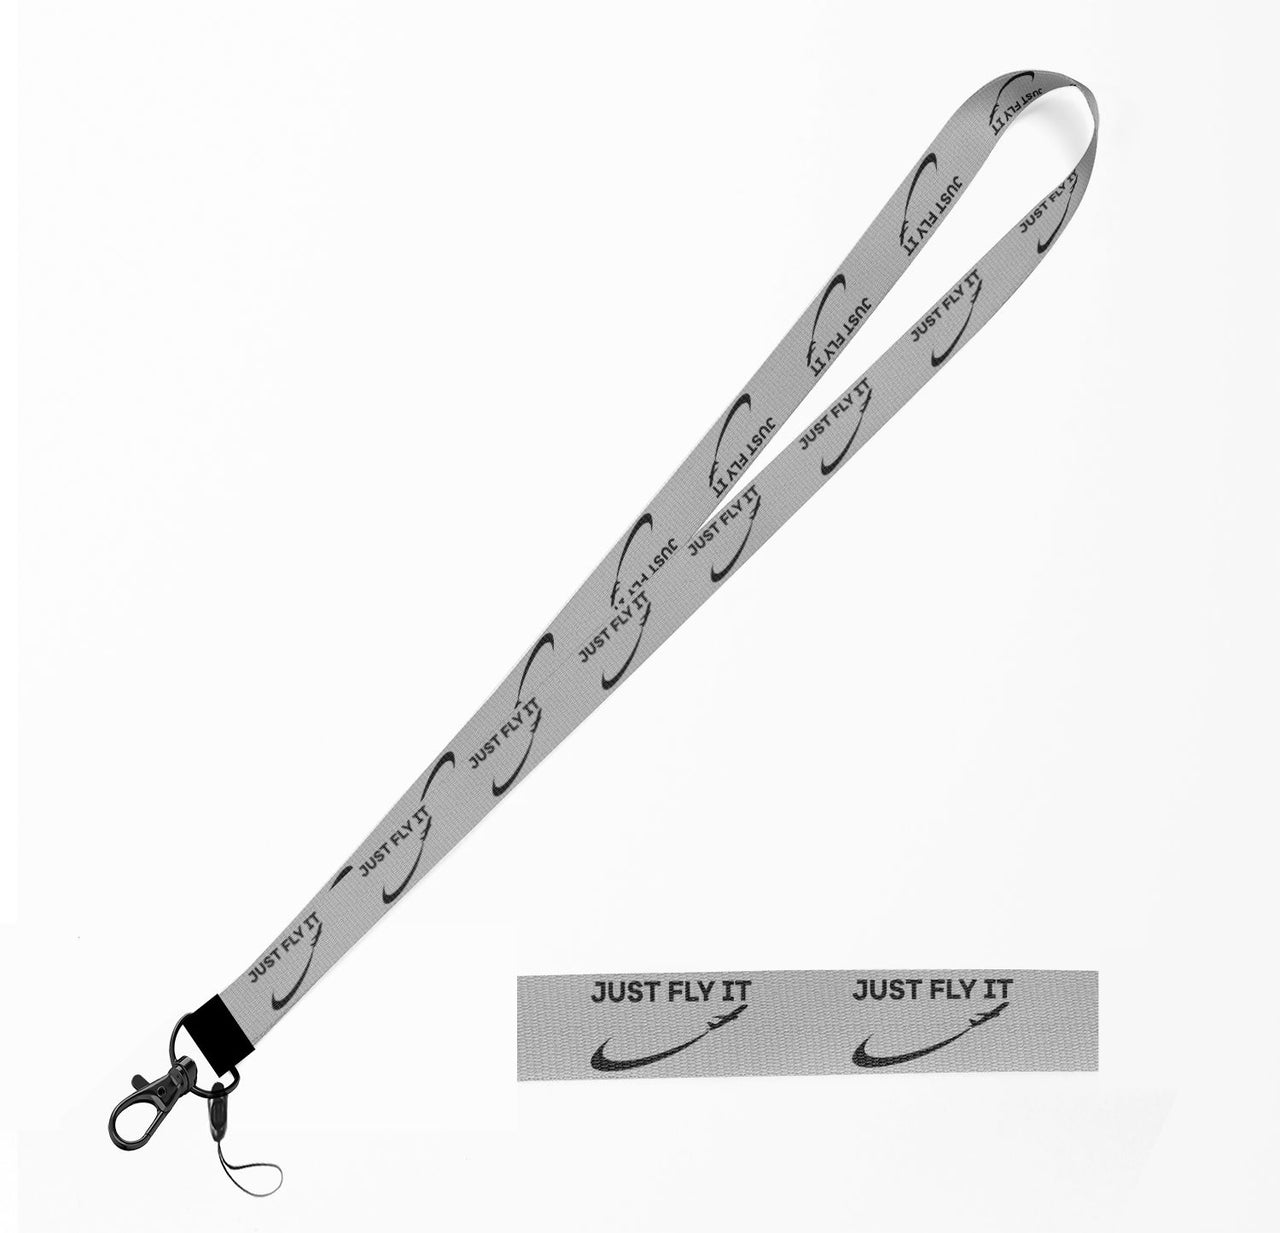 Just Fly It 2 Designed Lanyard & ID Holders